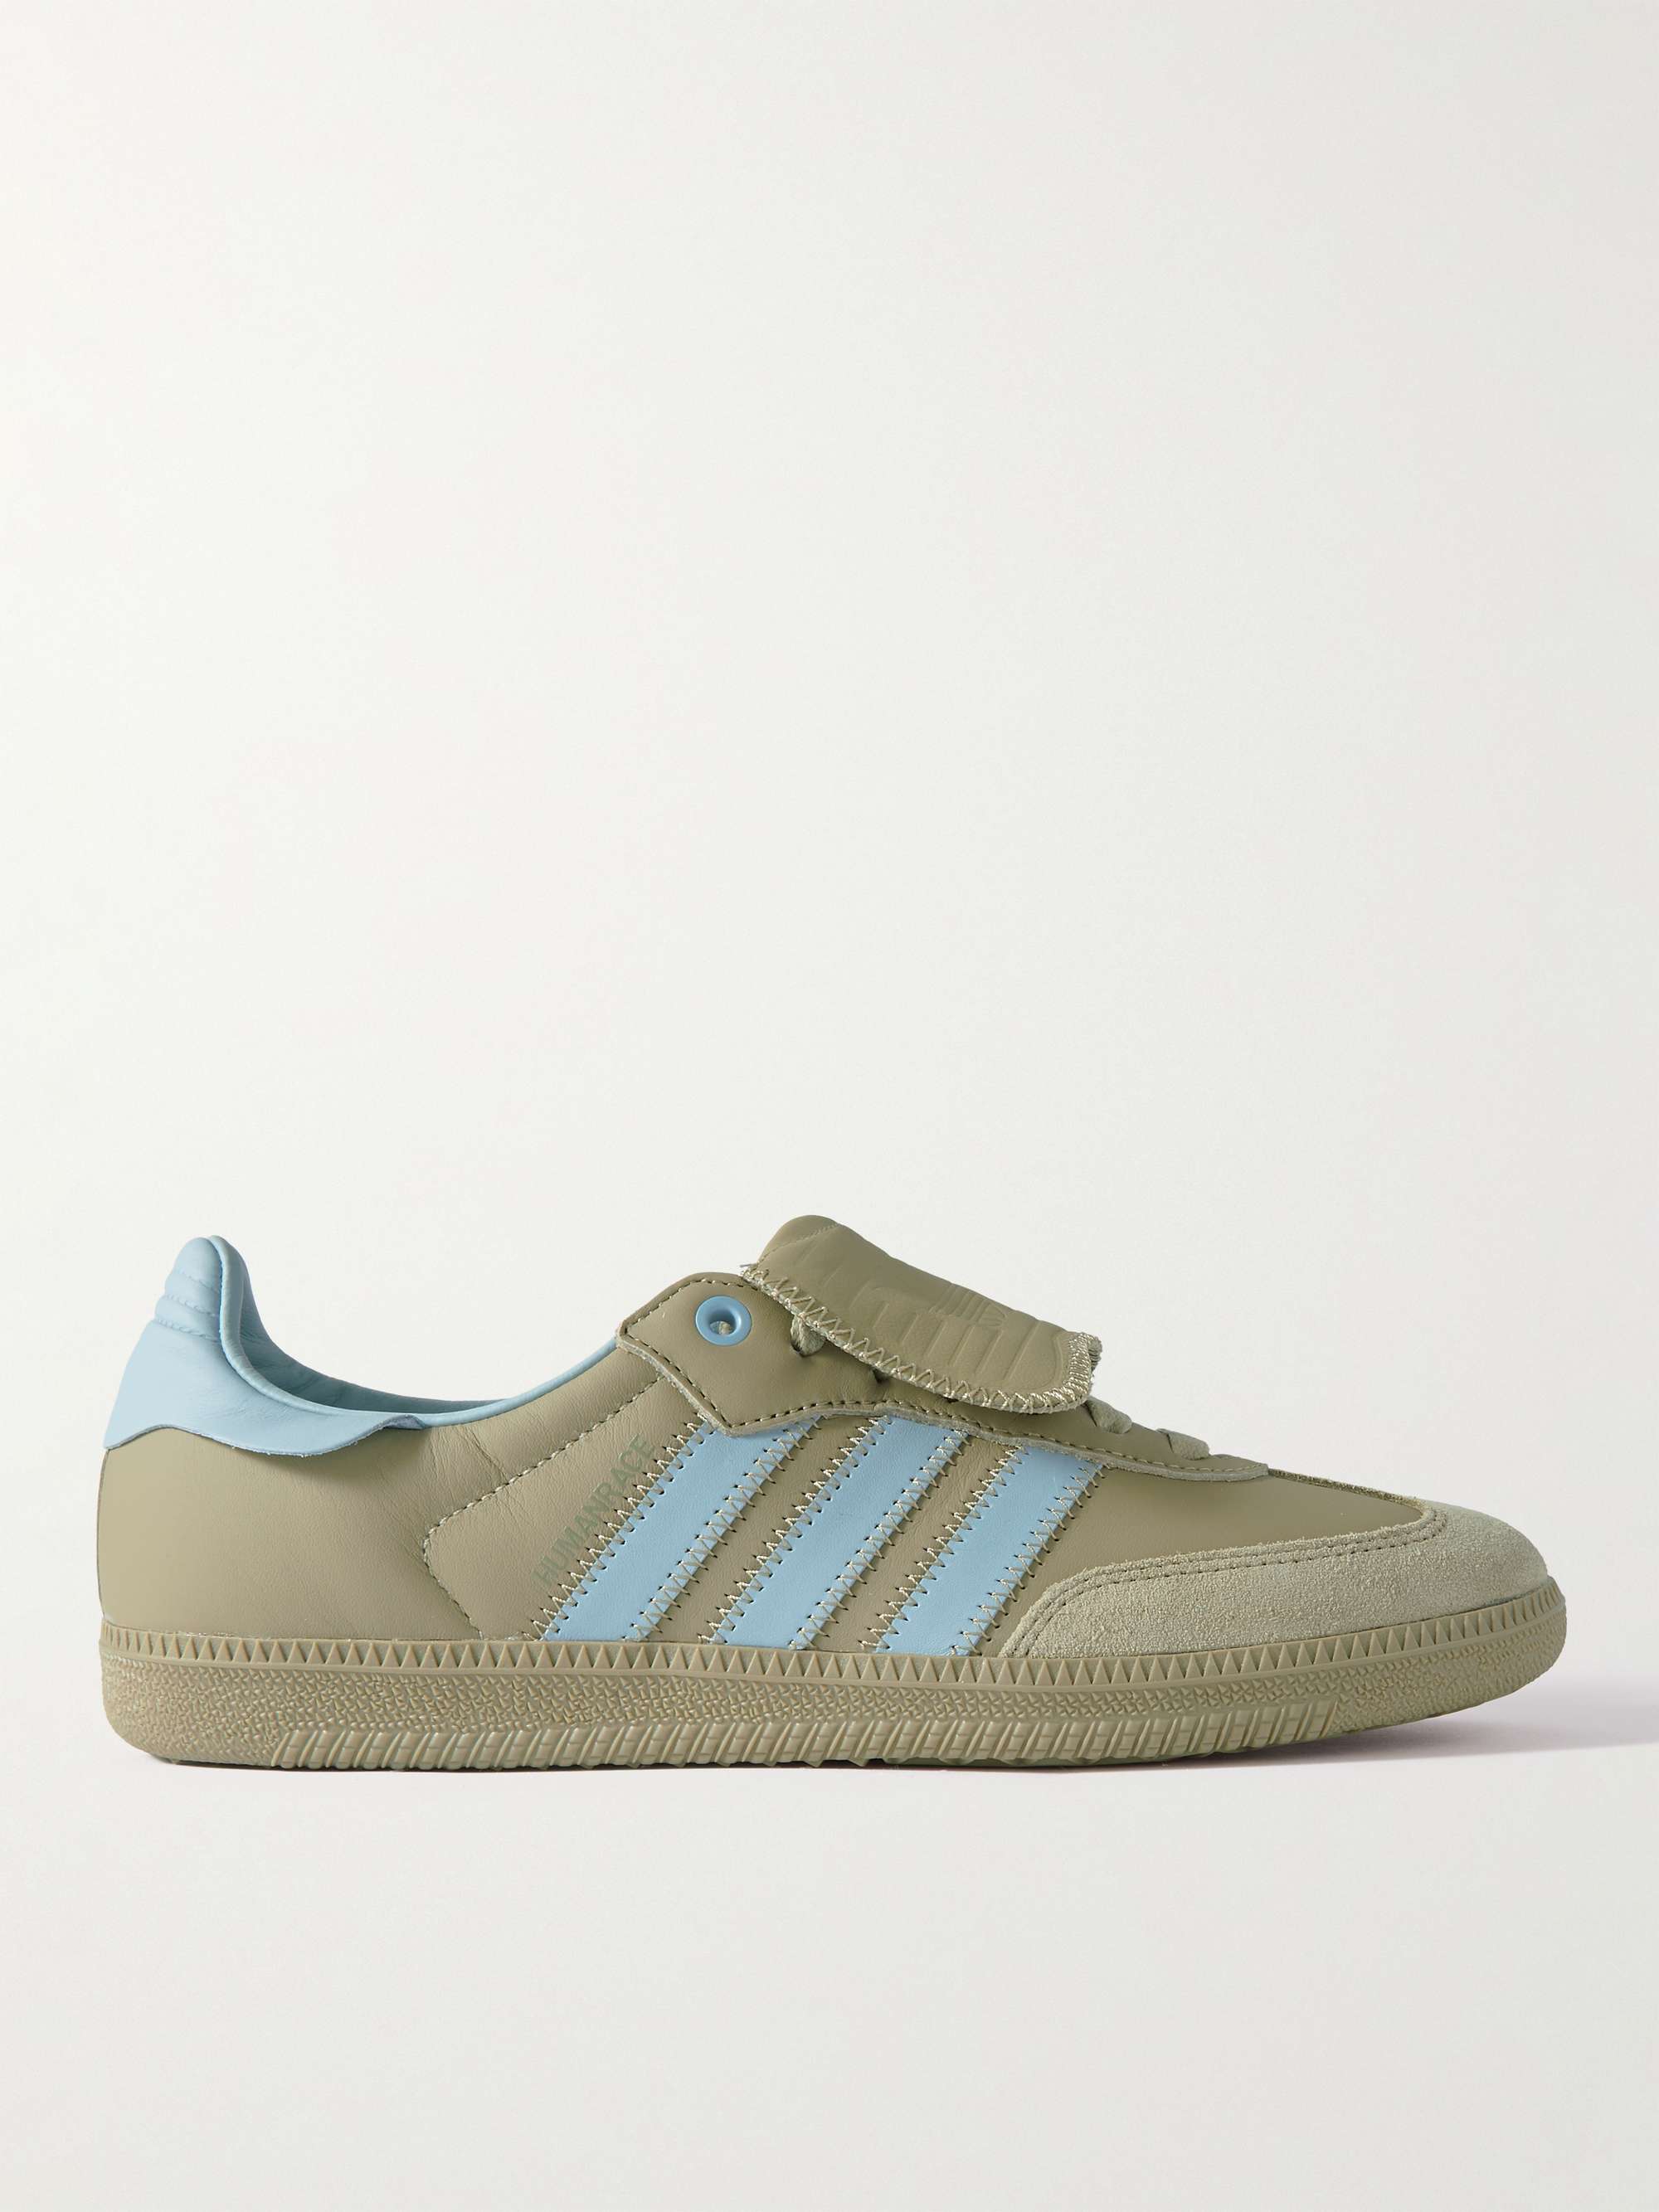 ADIDAS ORIGINALS + Pharrell Williams Humanrace Samba Suede-Trimmed Leather  Sneakers for Men | MR PORTER